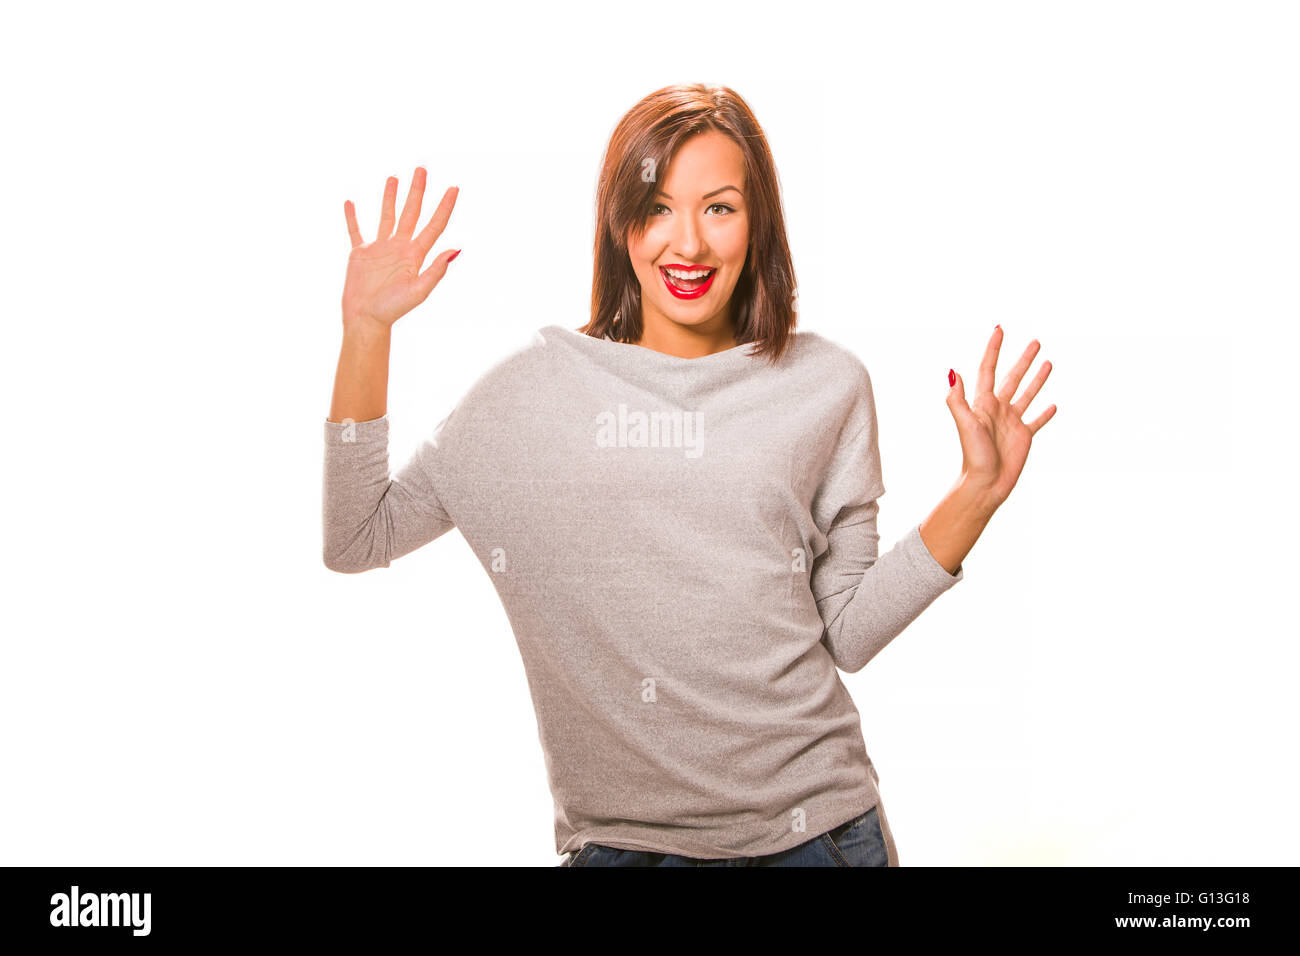 Beautiful happy young woman standing with hands up, wearing jeans and grey blouse. Stock Photo